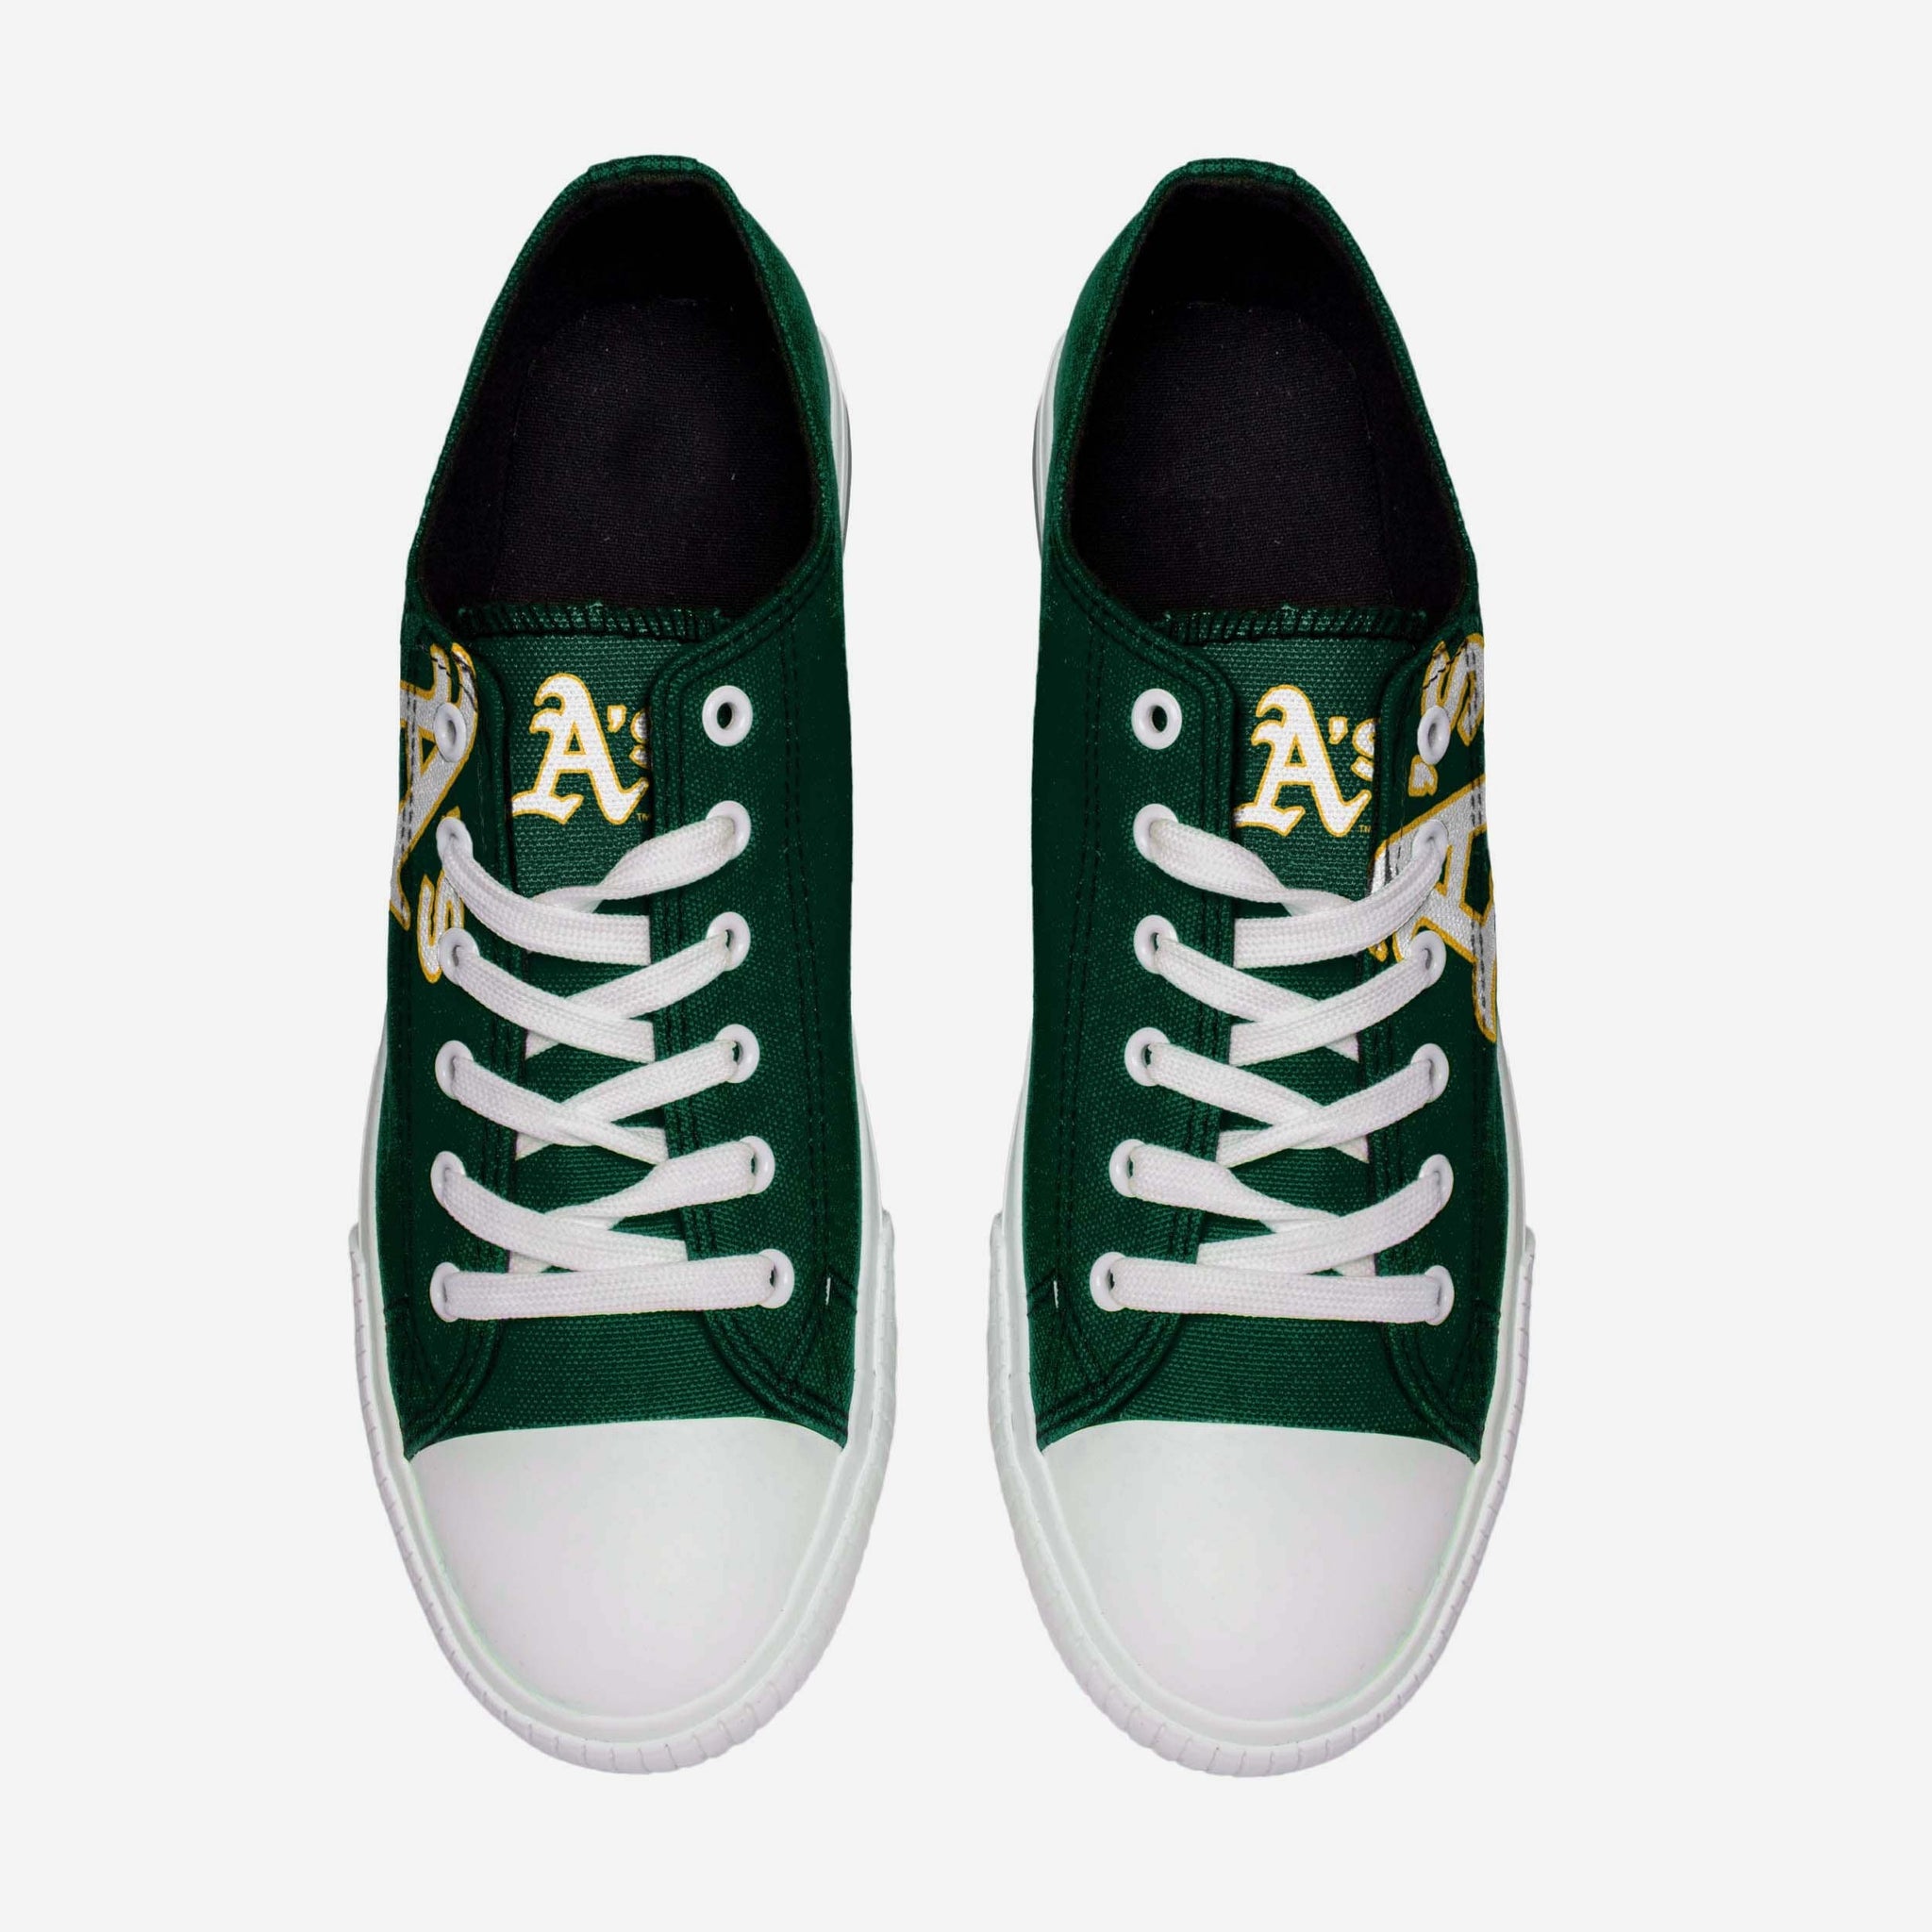 Discover 185+ oakland shoes latest